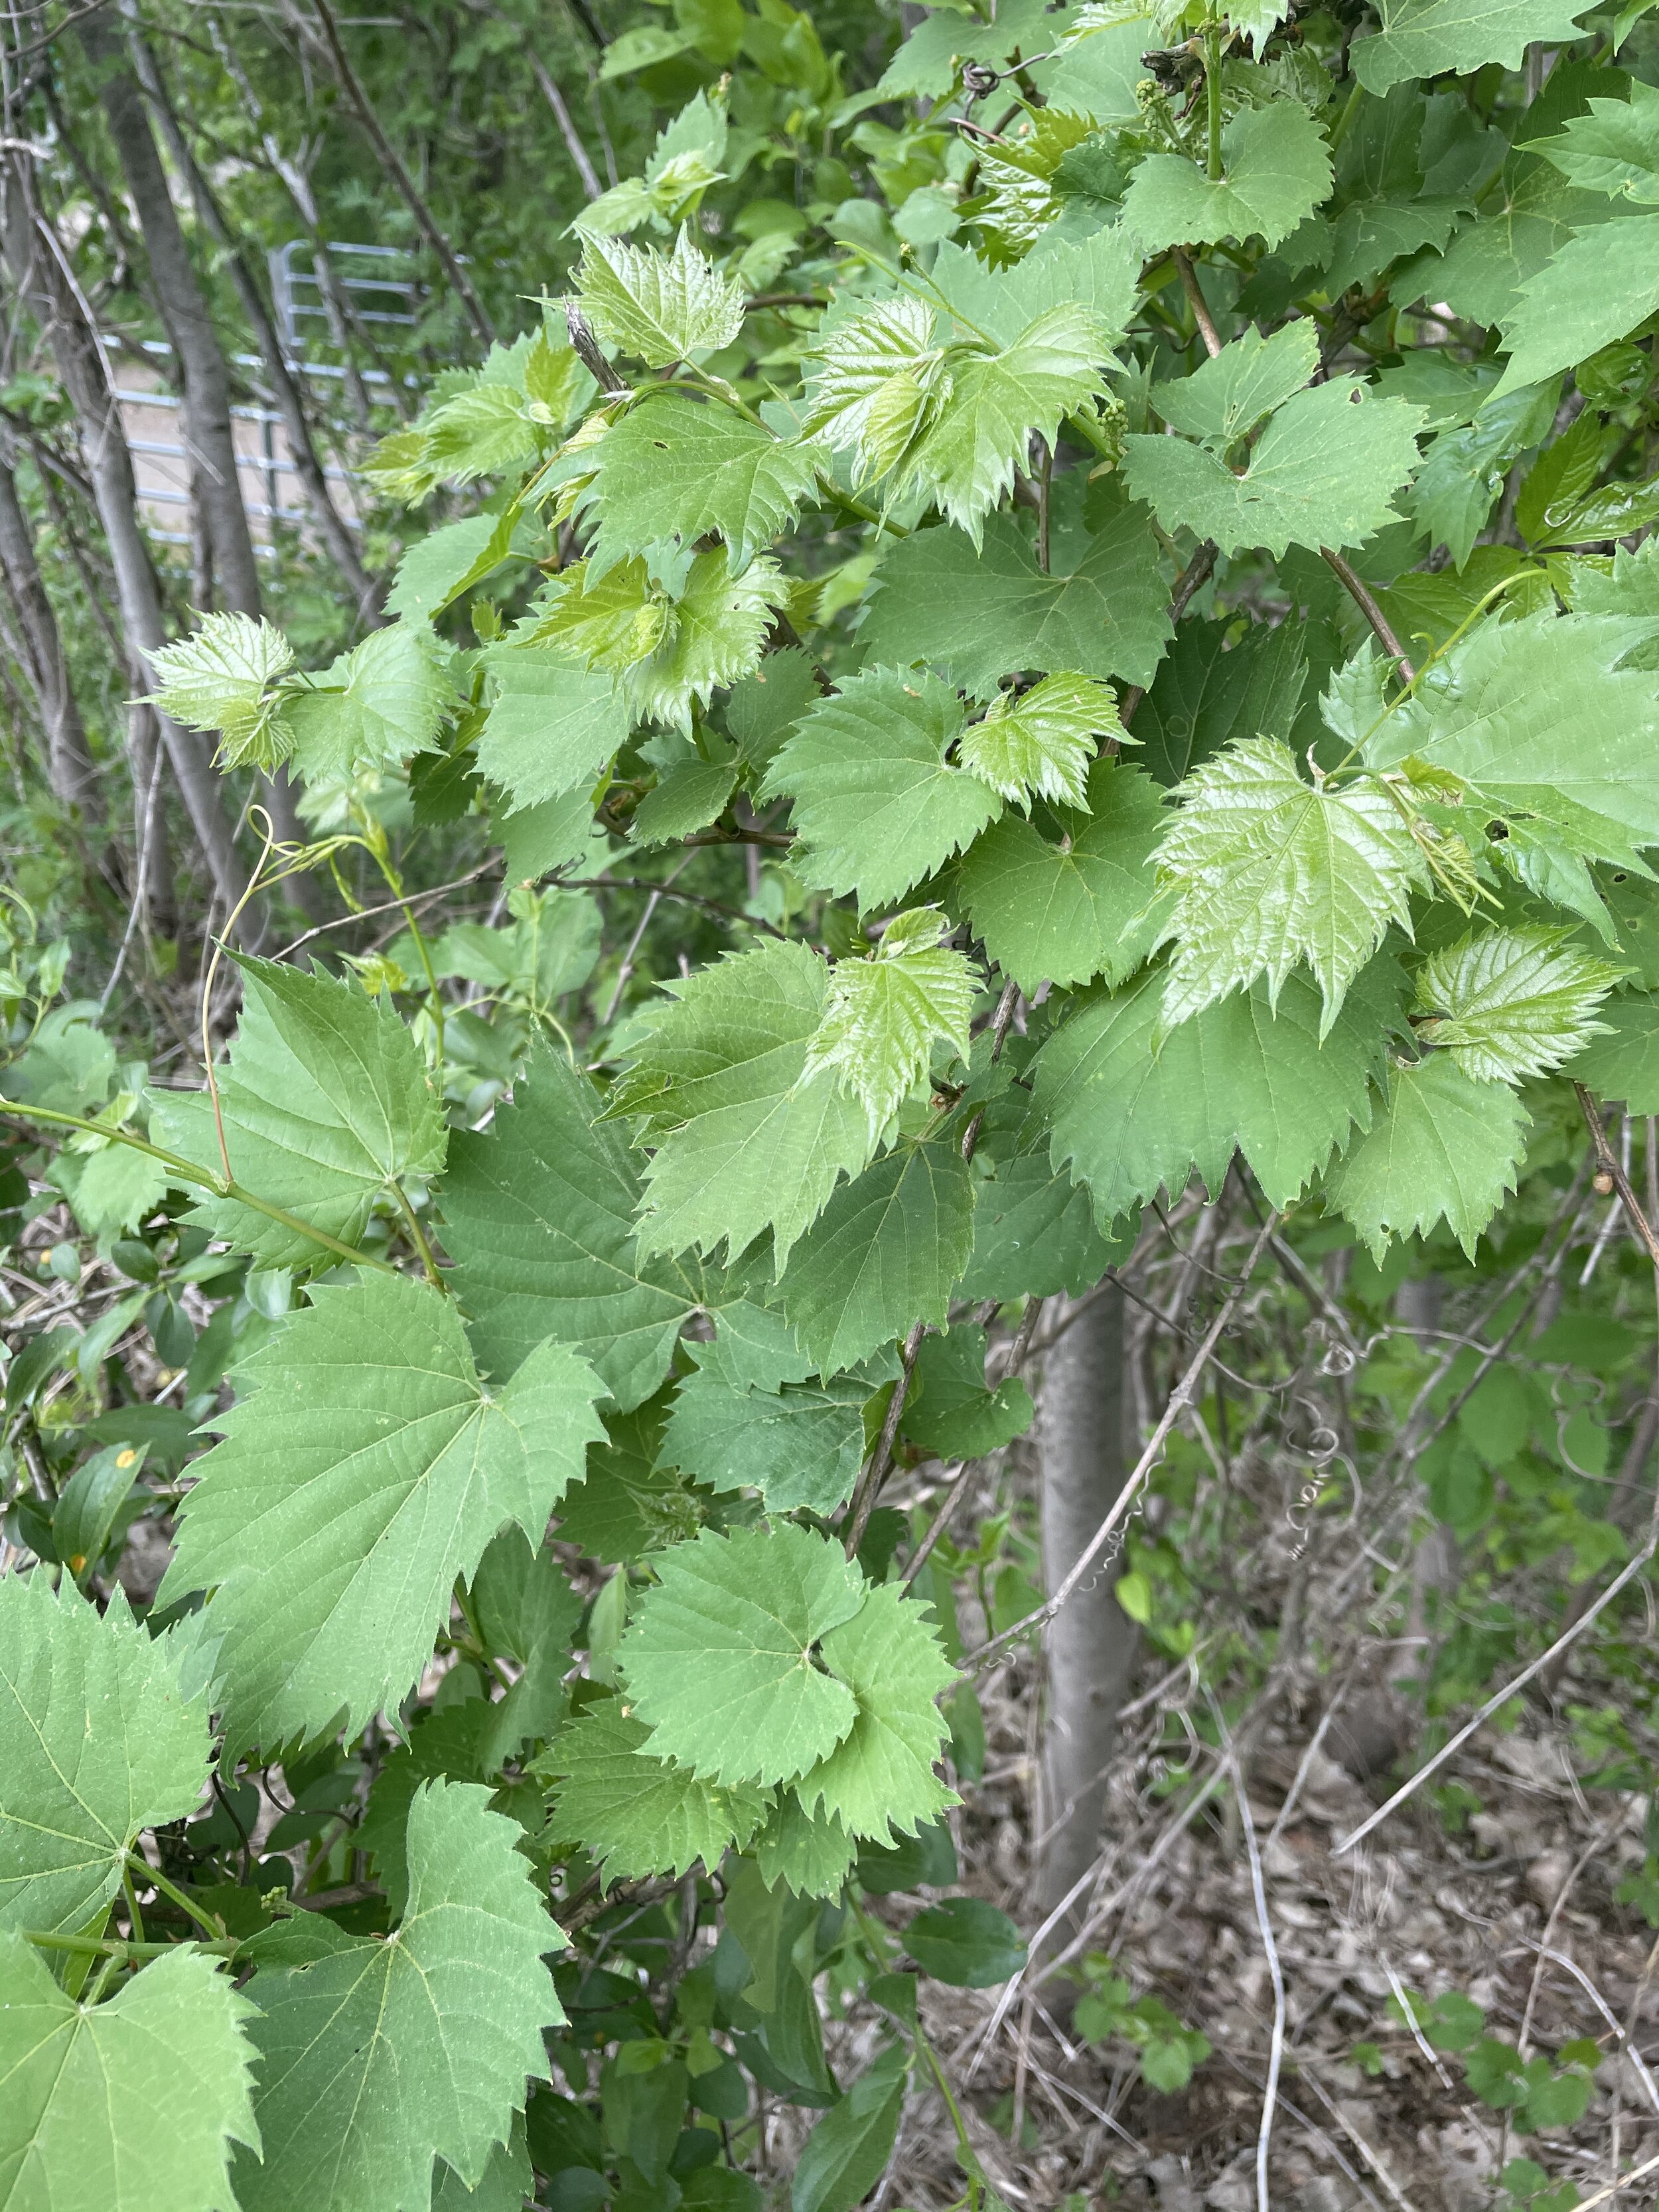  The riverside grape leaves - They are green and shiny on the underside while Fox grape are white fuzzy. When harvested in late Spring and blanched in boiling water for 20 seconds you can use them to make stuffed grape leaf recipes. 